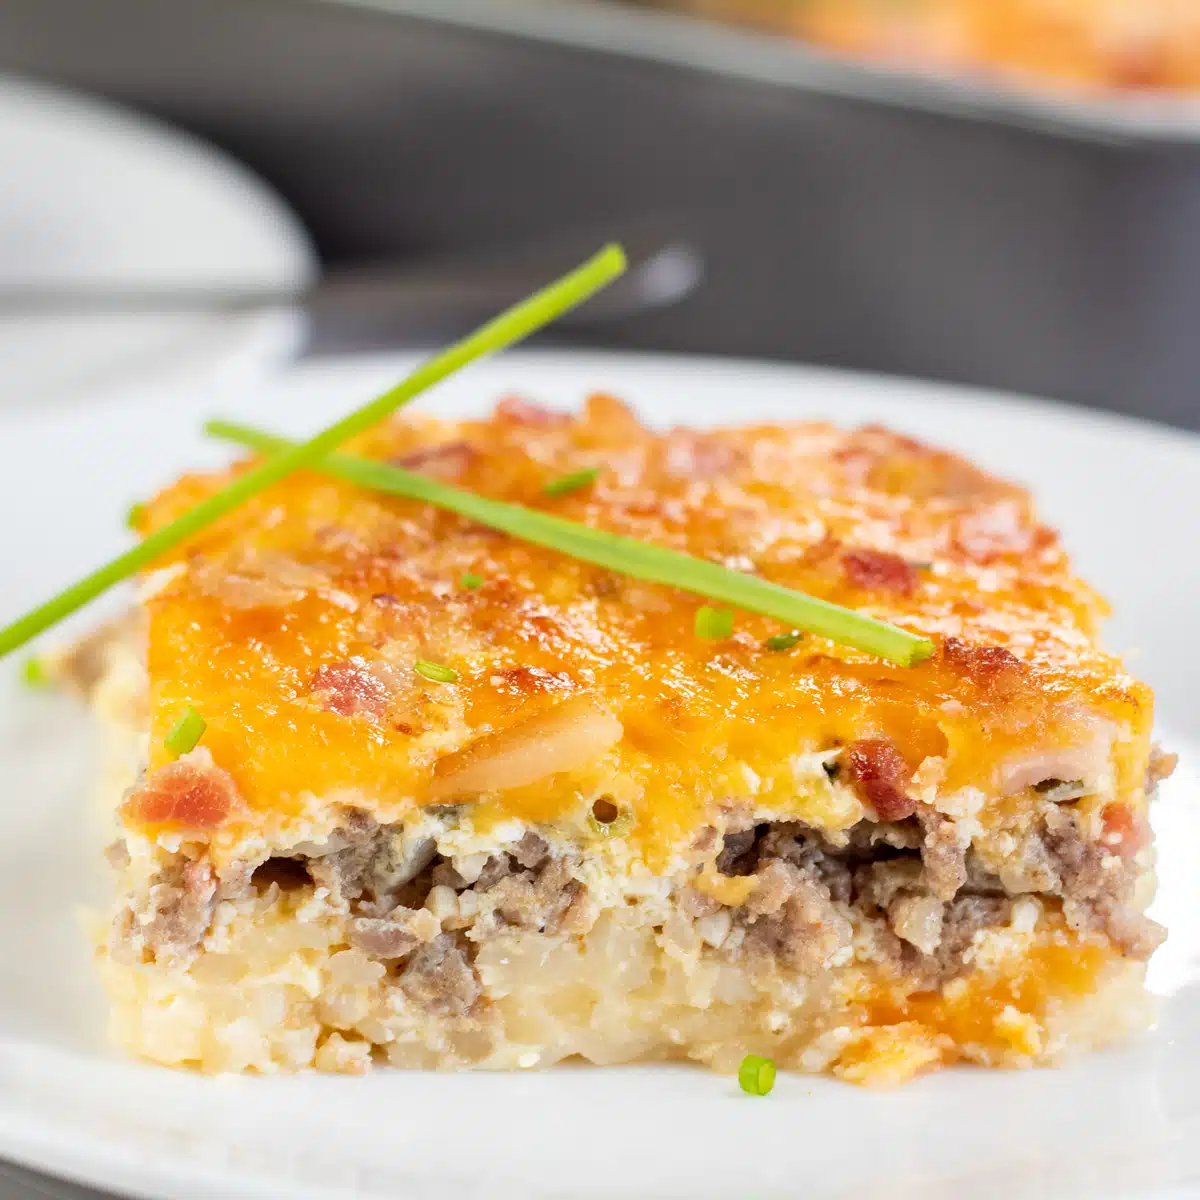 Square image of a slice of this hashbrown sausage bacon egg casserole.